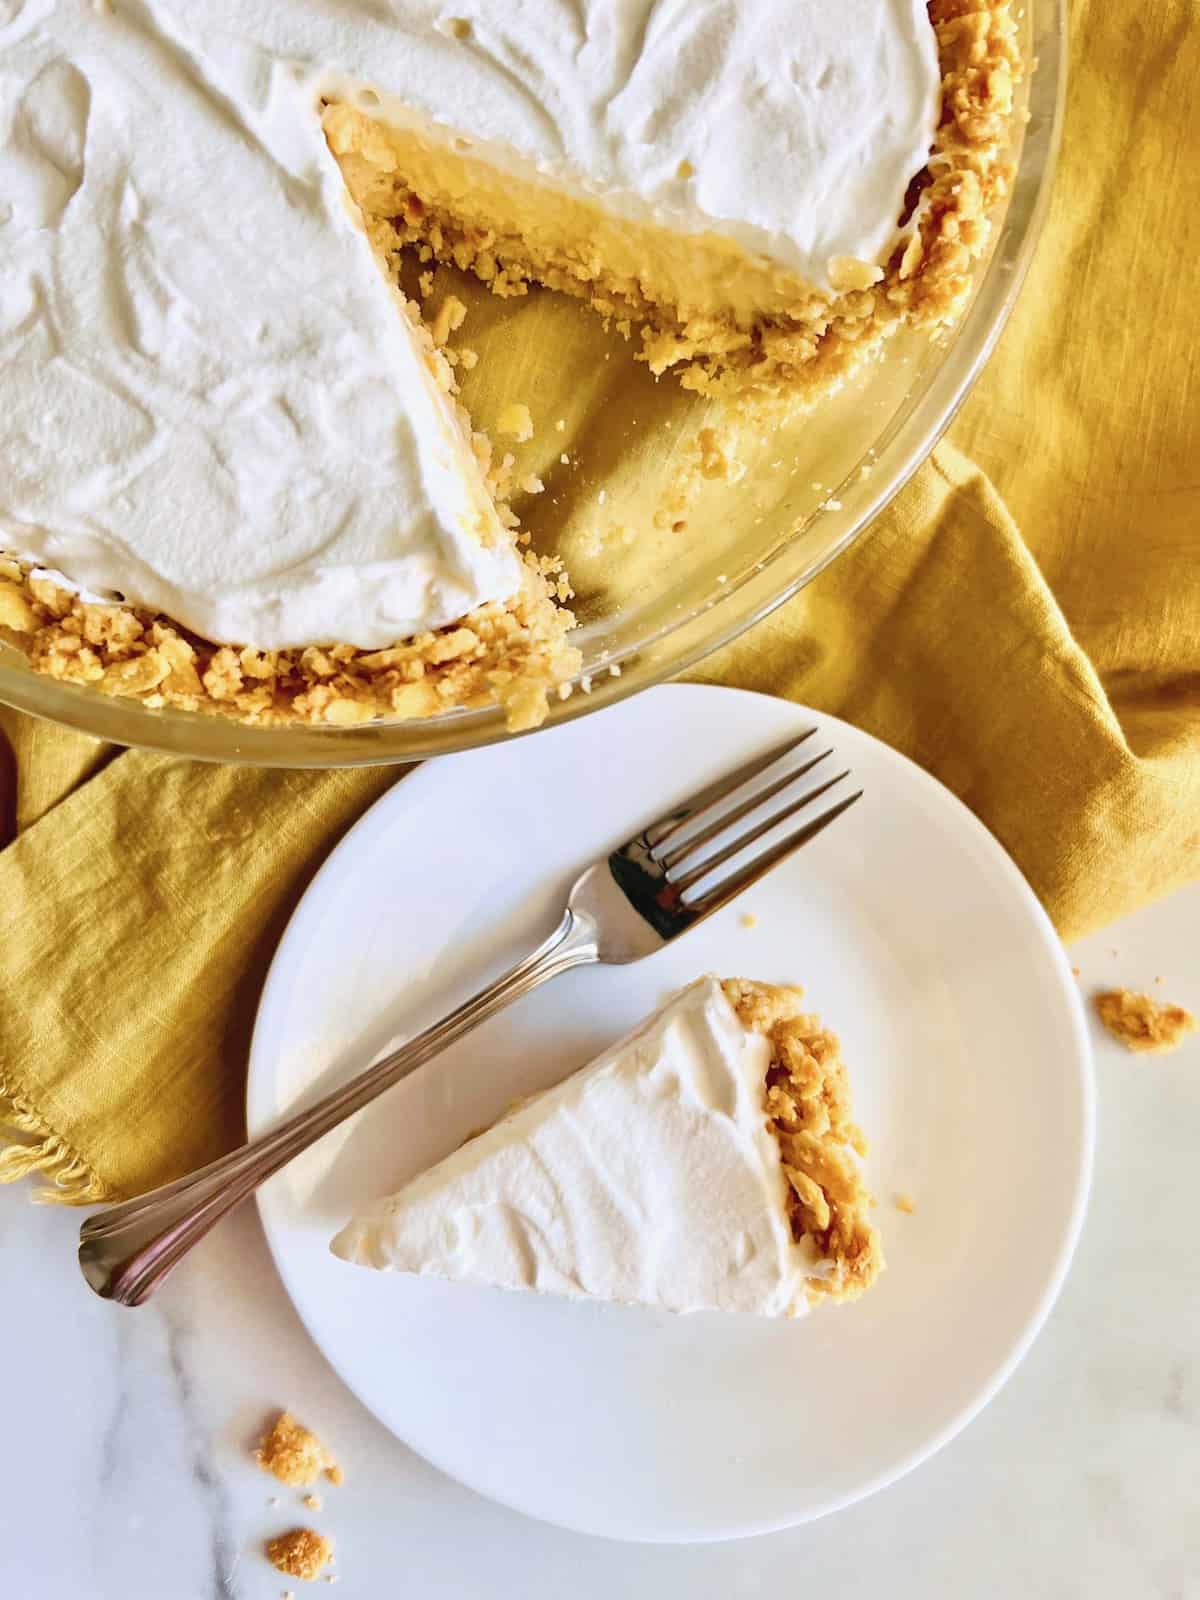 North Carolina Lemon Pie Plated slice and full pie with cut overhead,